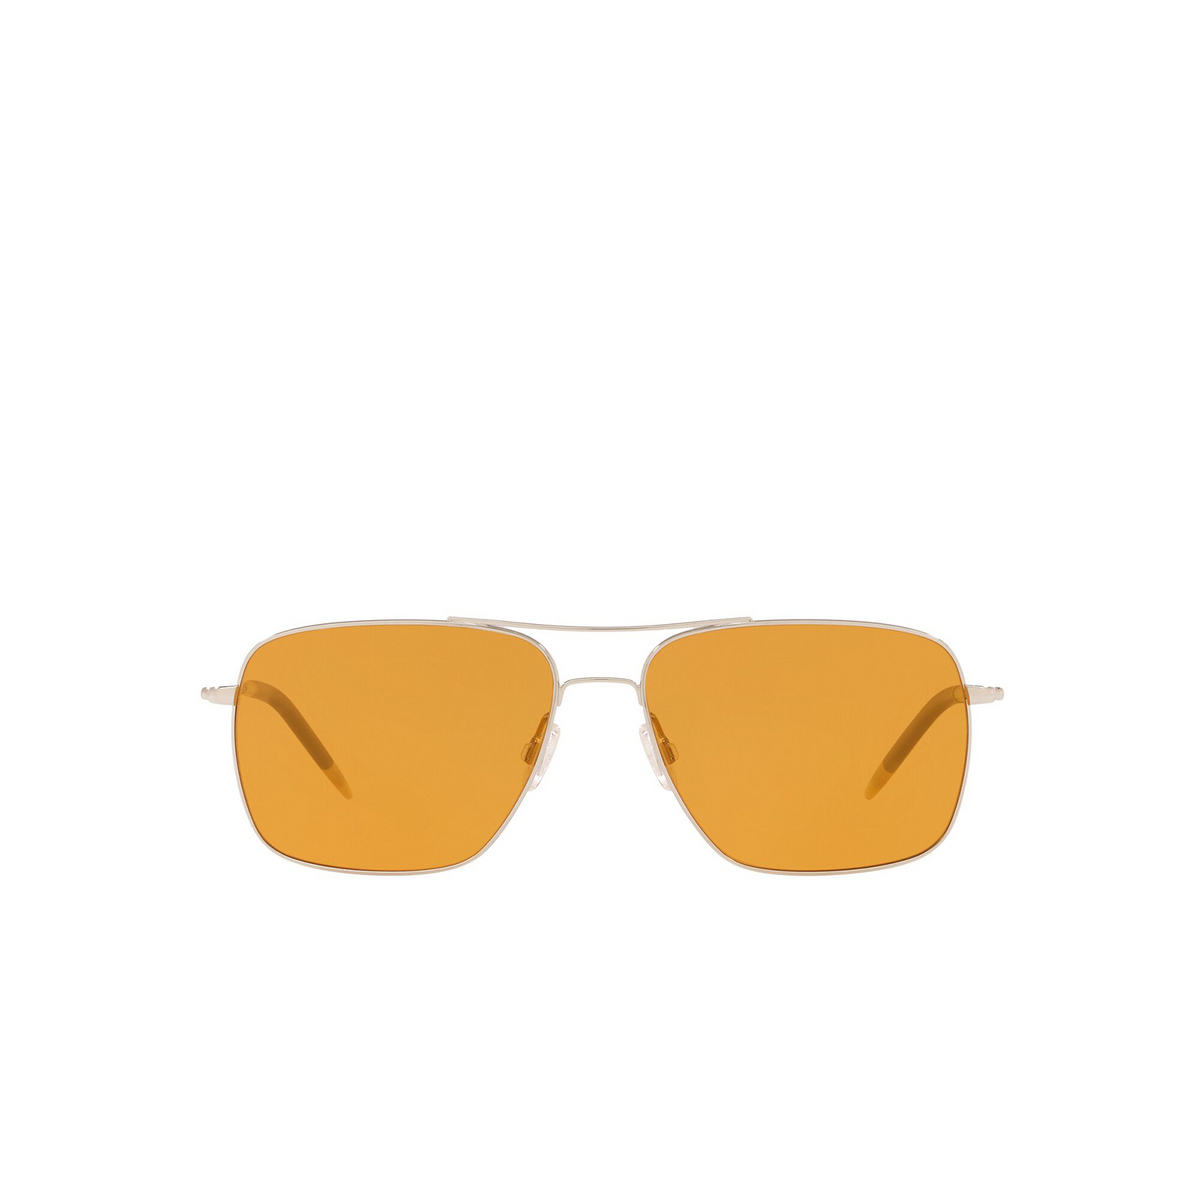 Oliver Peoples® Rectangle Sunglasses: Clifton OV1150S color Silver 5036N9 - front view.